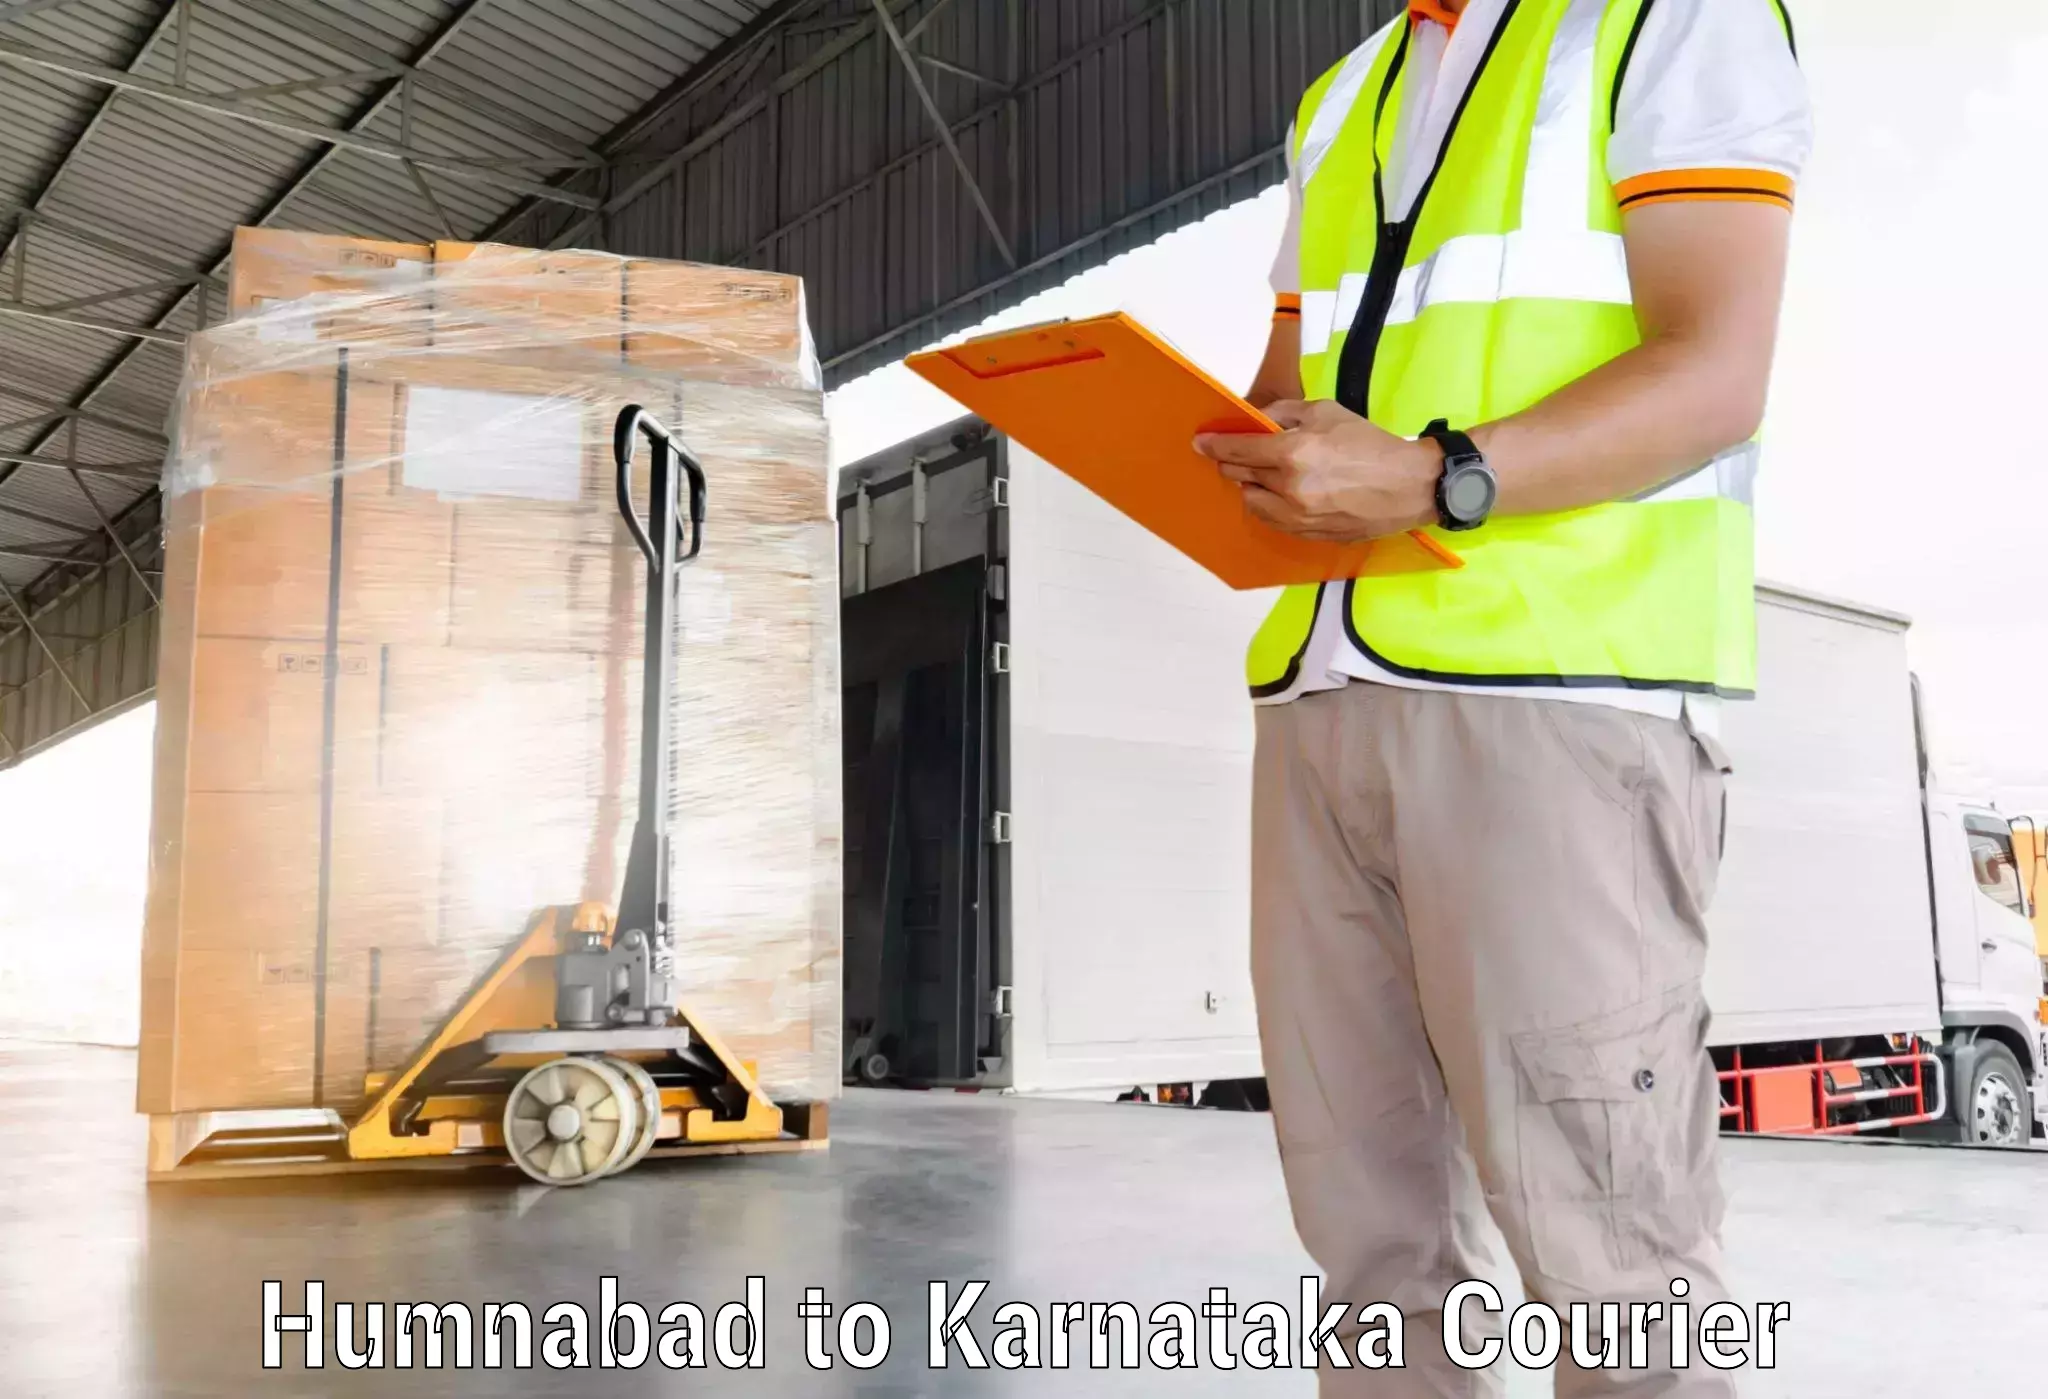 Efficient parcel transport in Humnabad to Maramanahalli